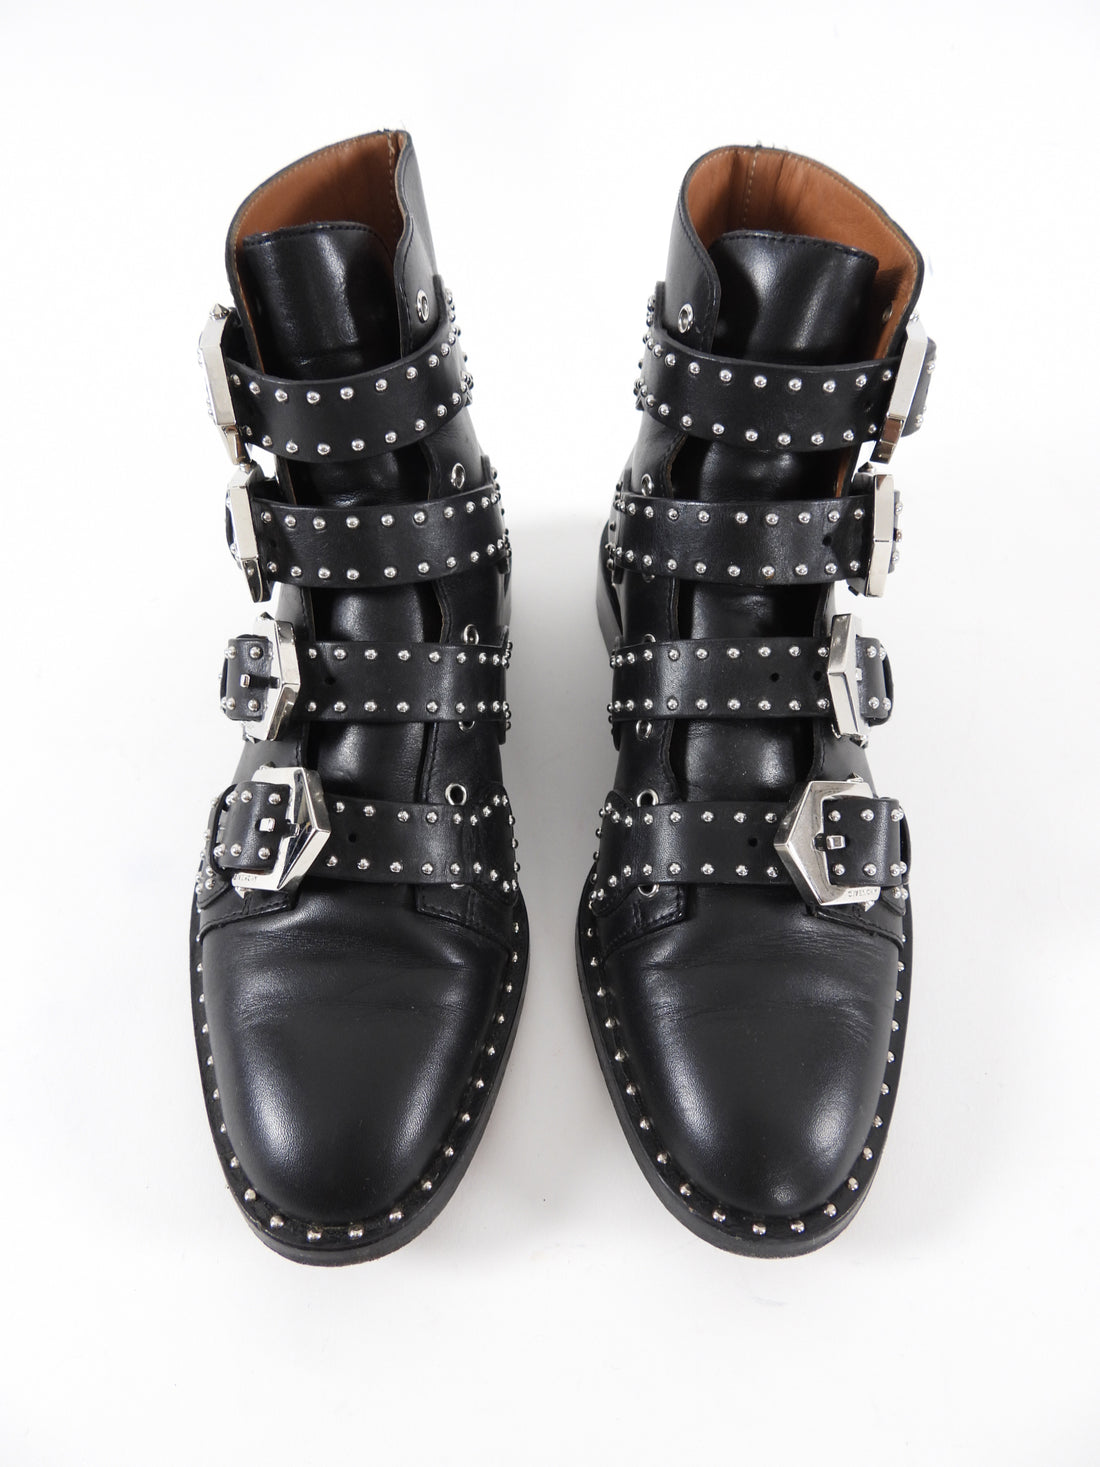 Givenchy Stud Buckle Ankle Boot - USA 6.5